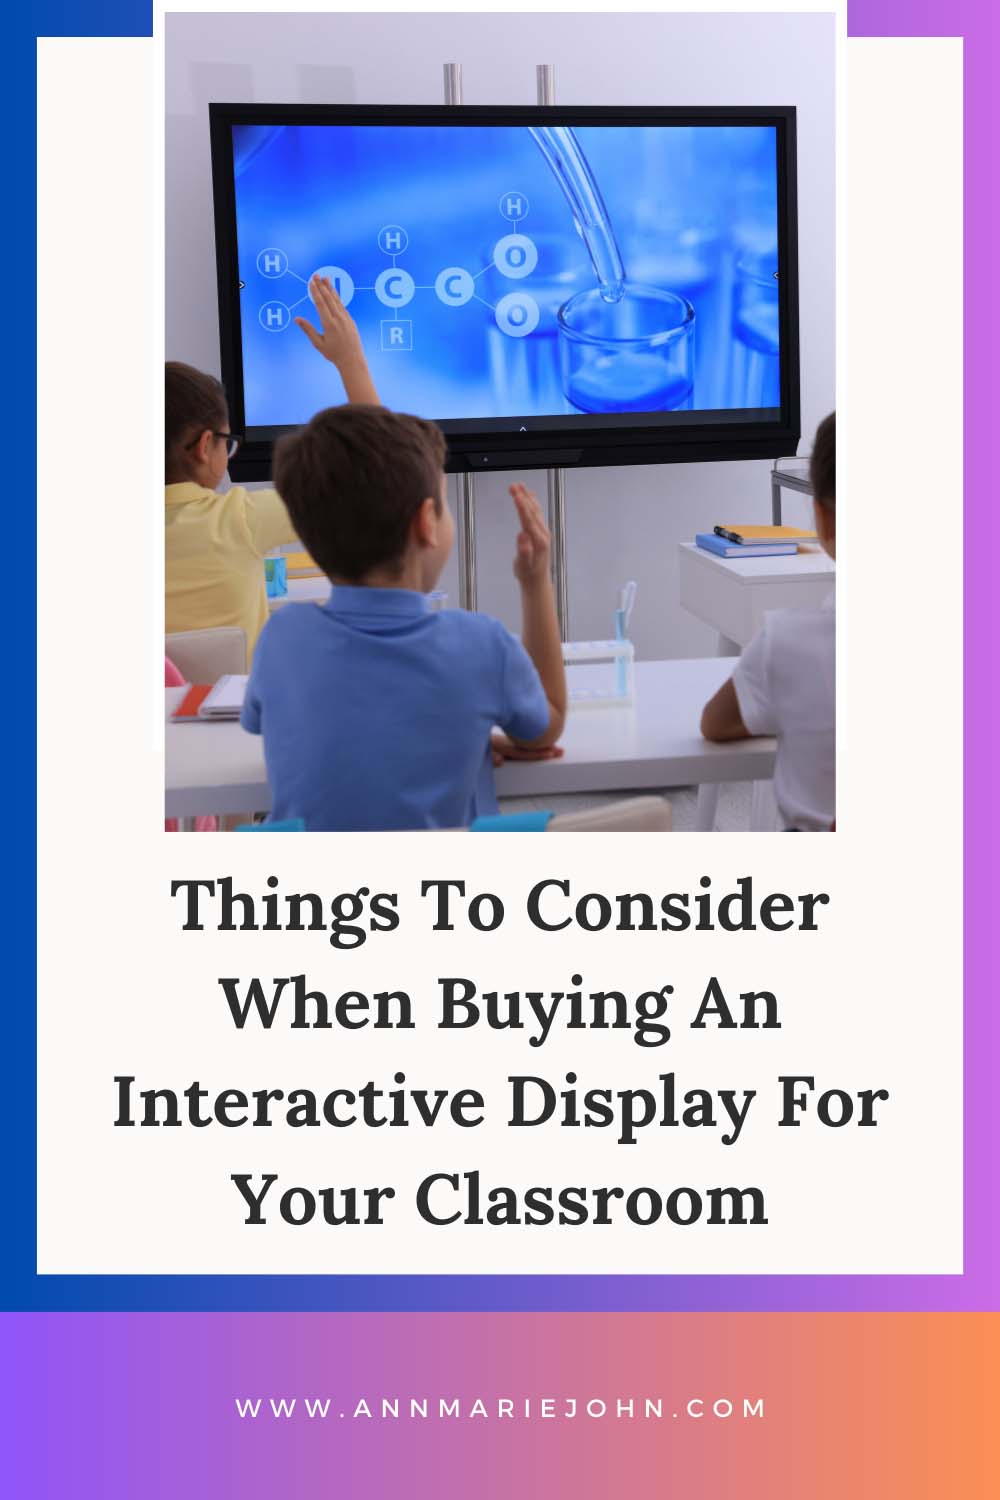 Things To Consider When Buying An Interactive Display For Your Classroom